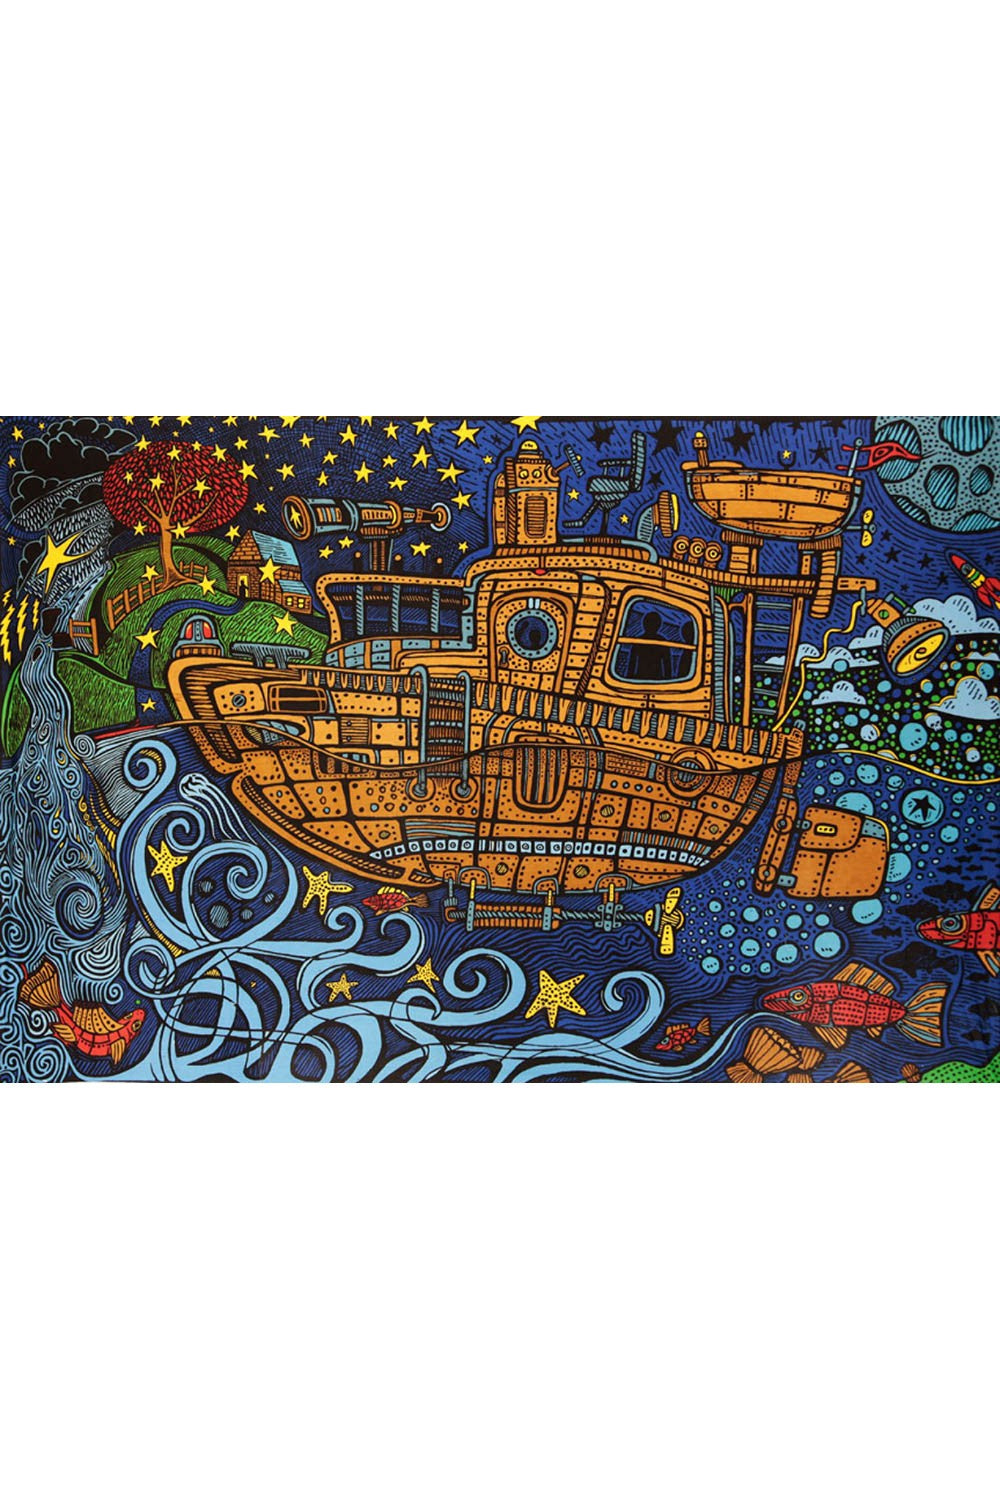 3D Steampunk Tug Tapestry